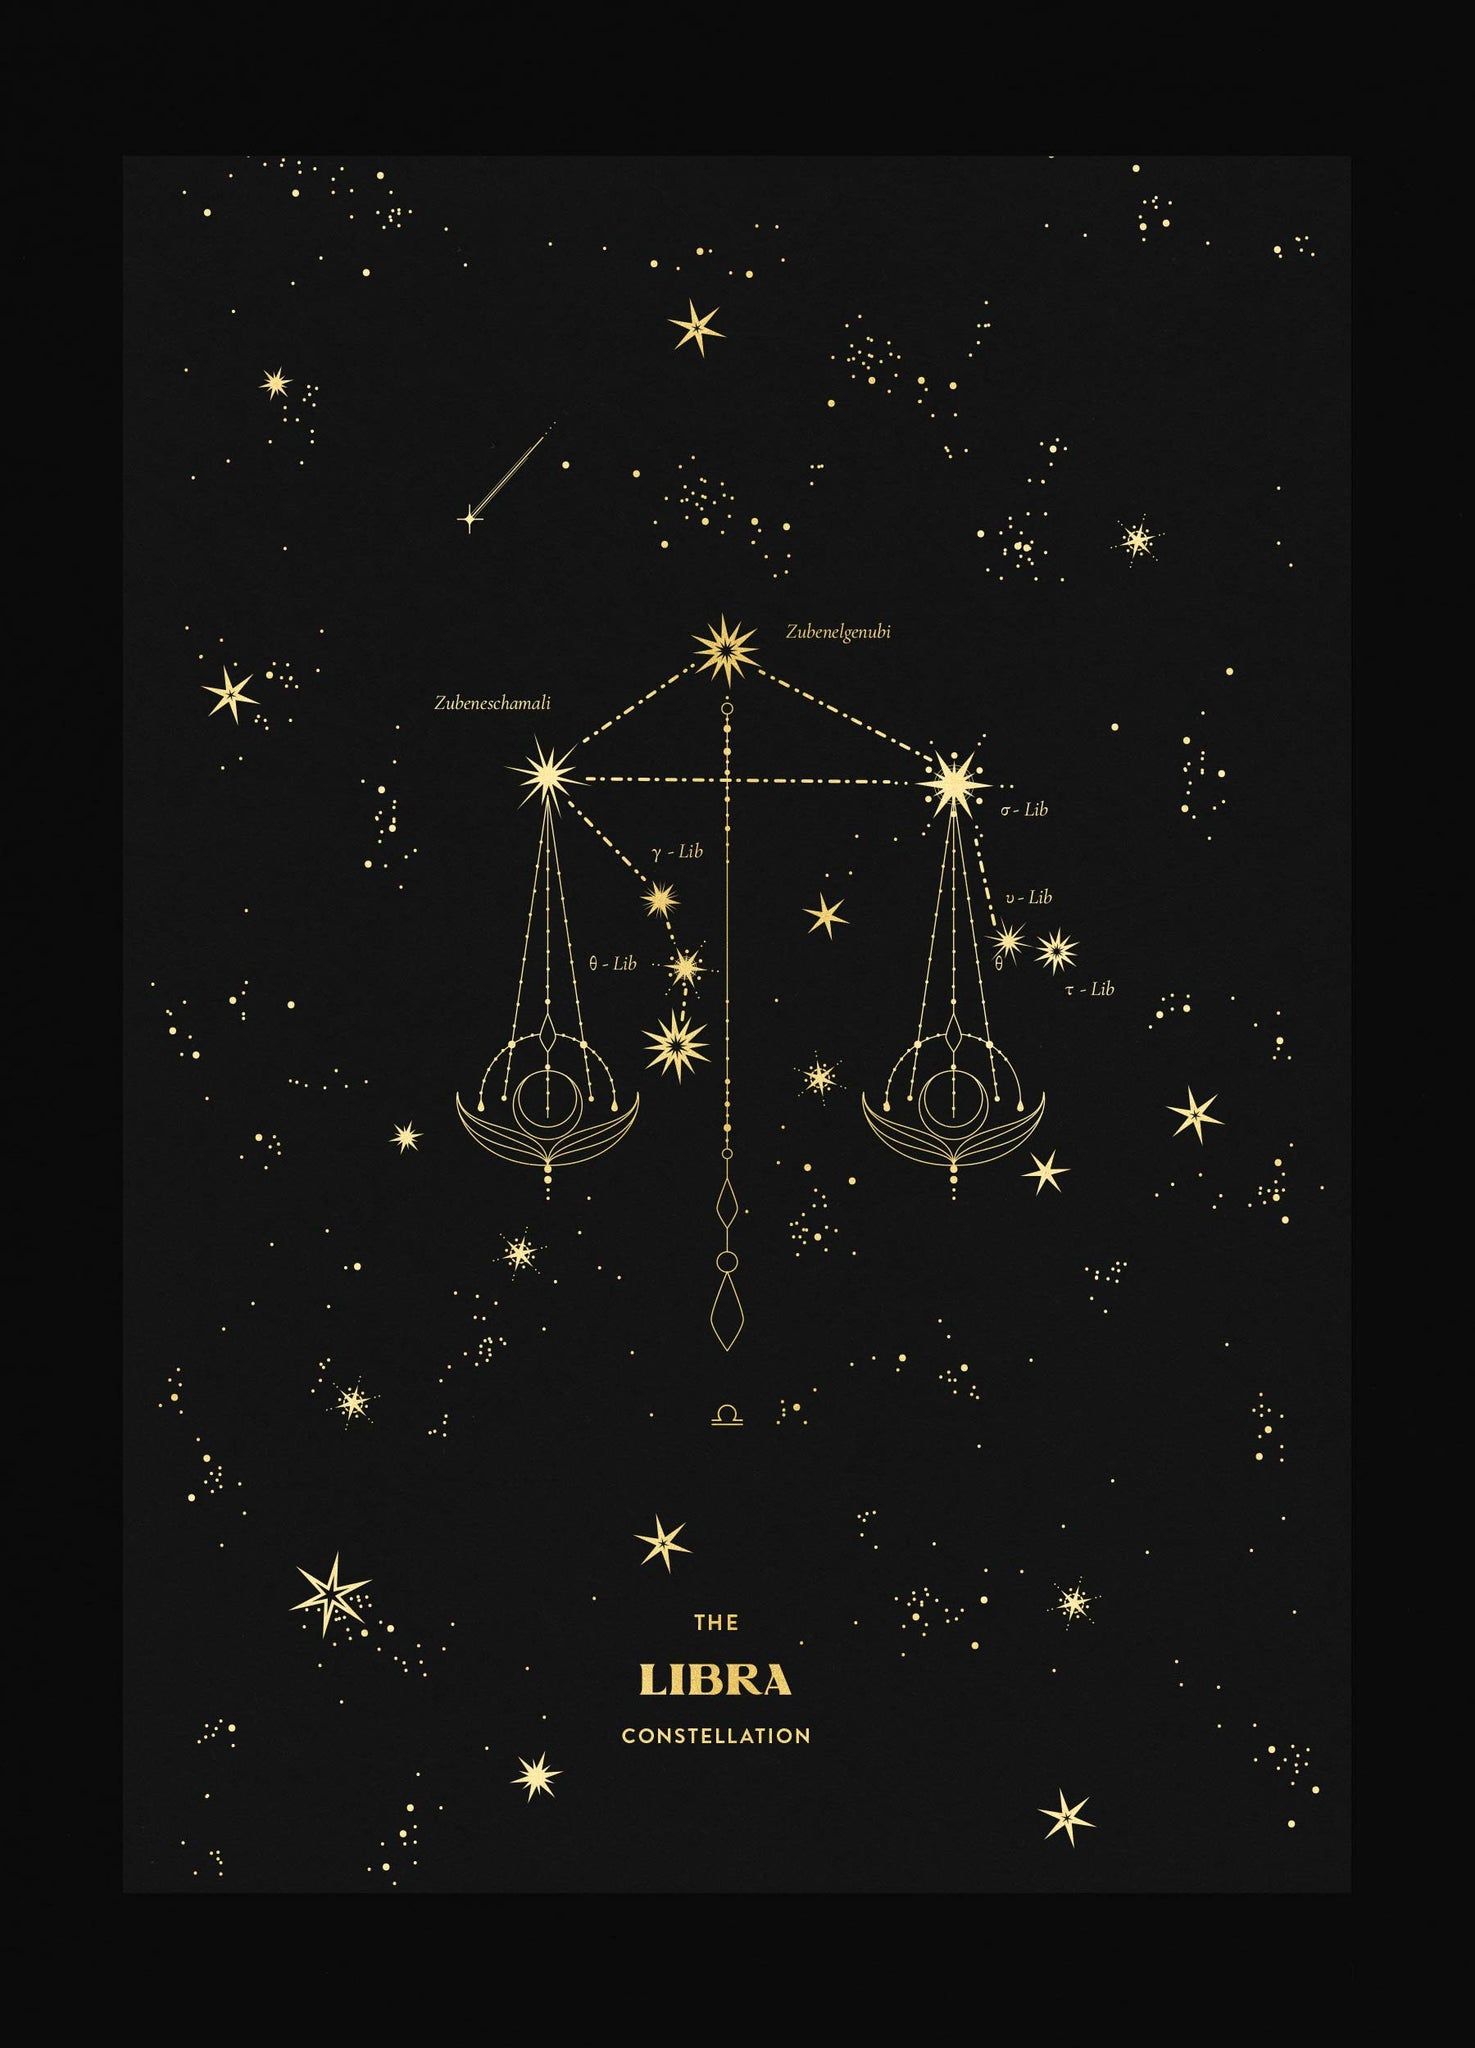 A black and gold poster with stars on it - Constellation, Libra